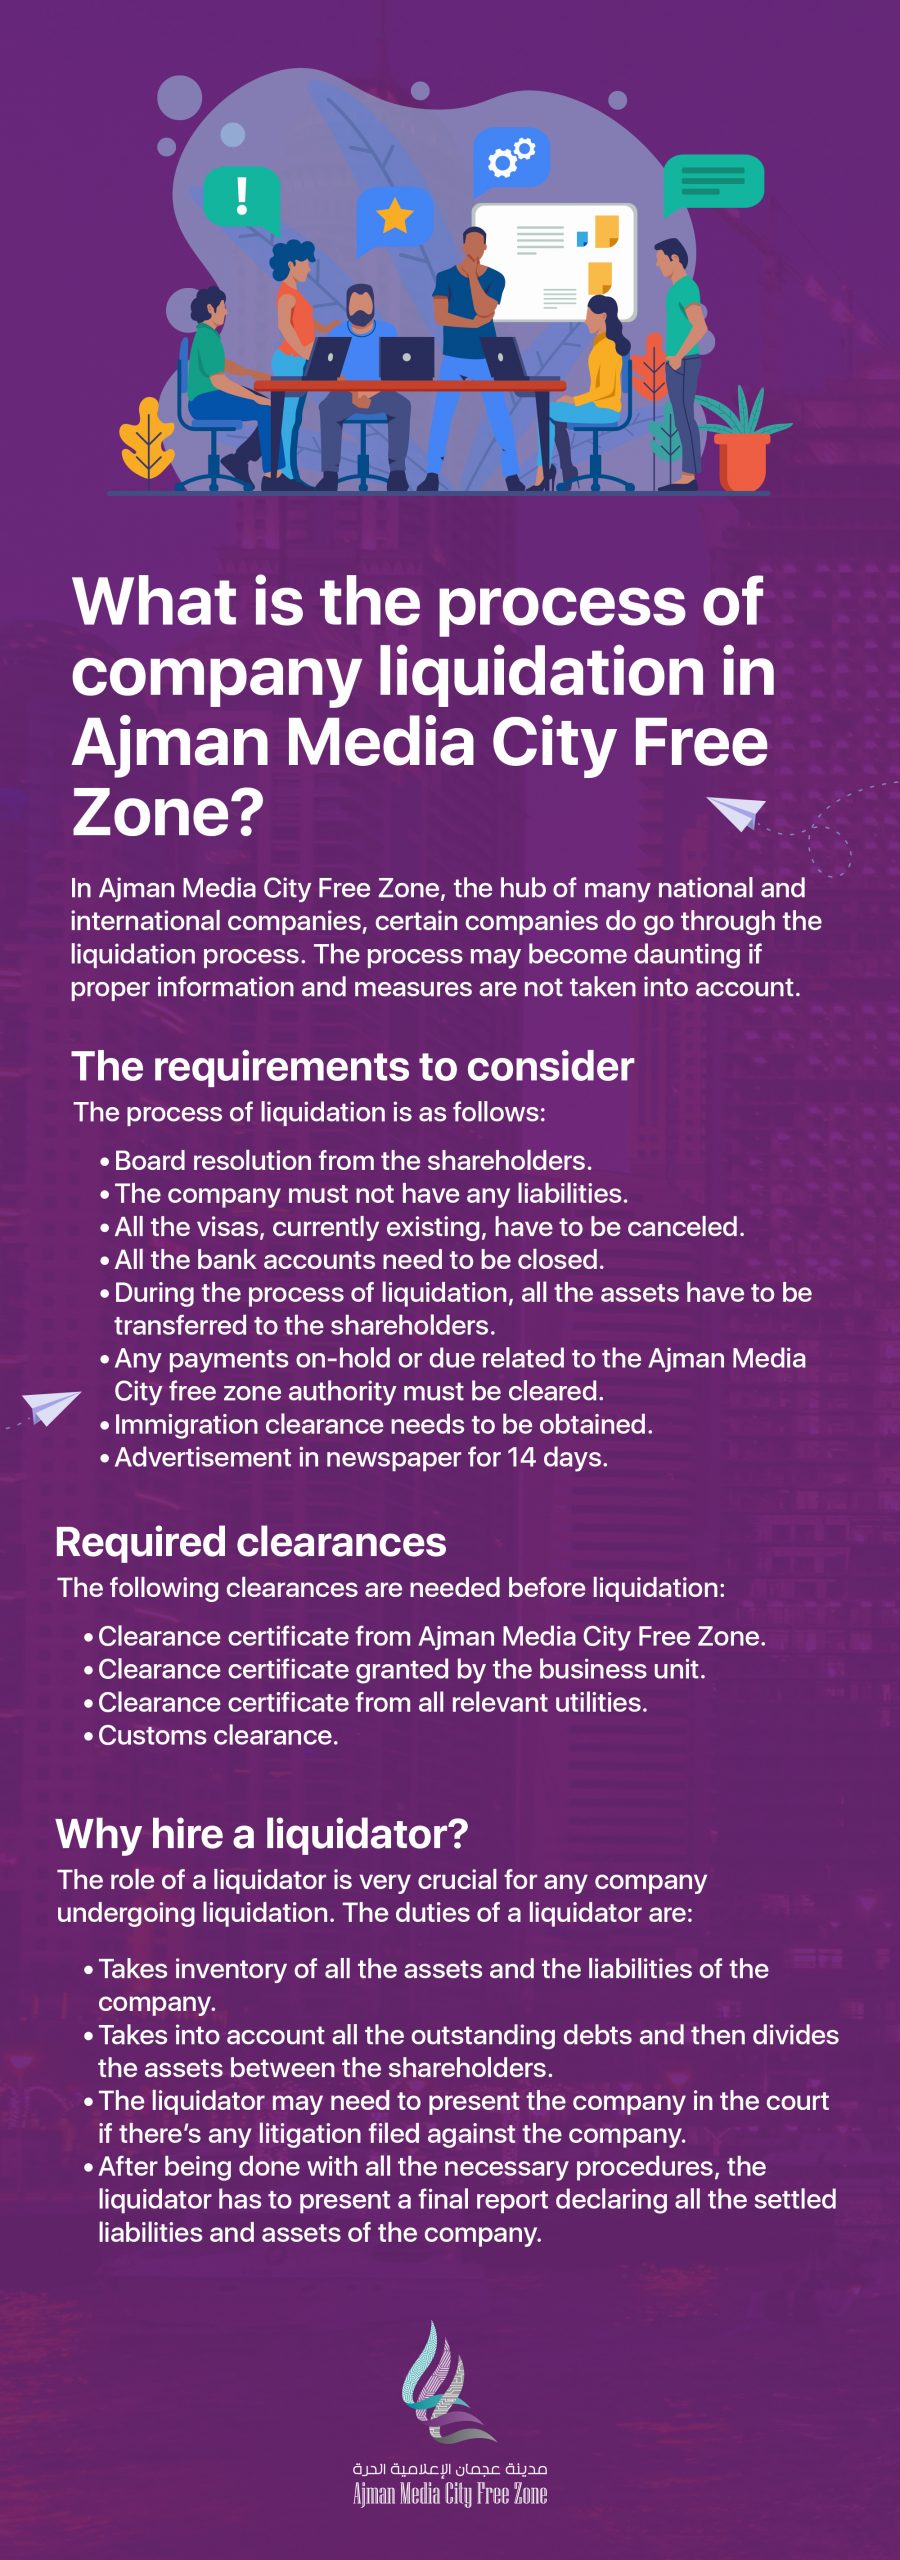 What is the process of company liquidation in Ajman Media City Free Zone?